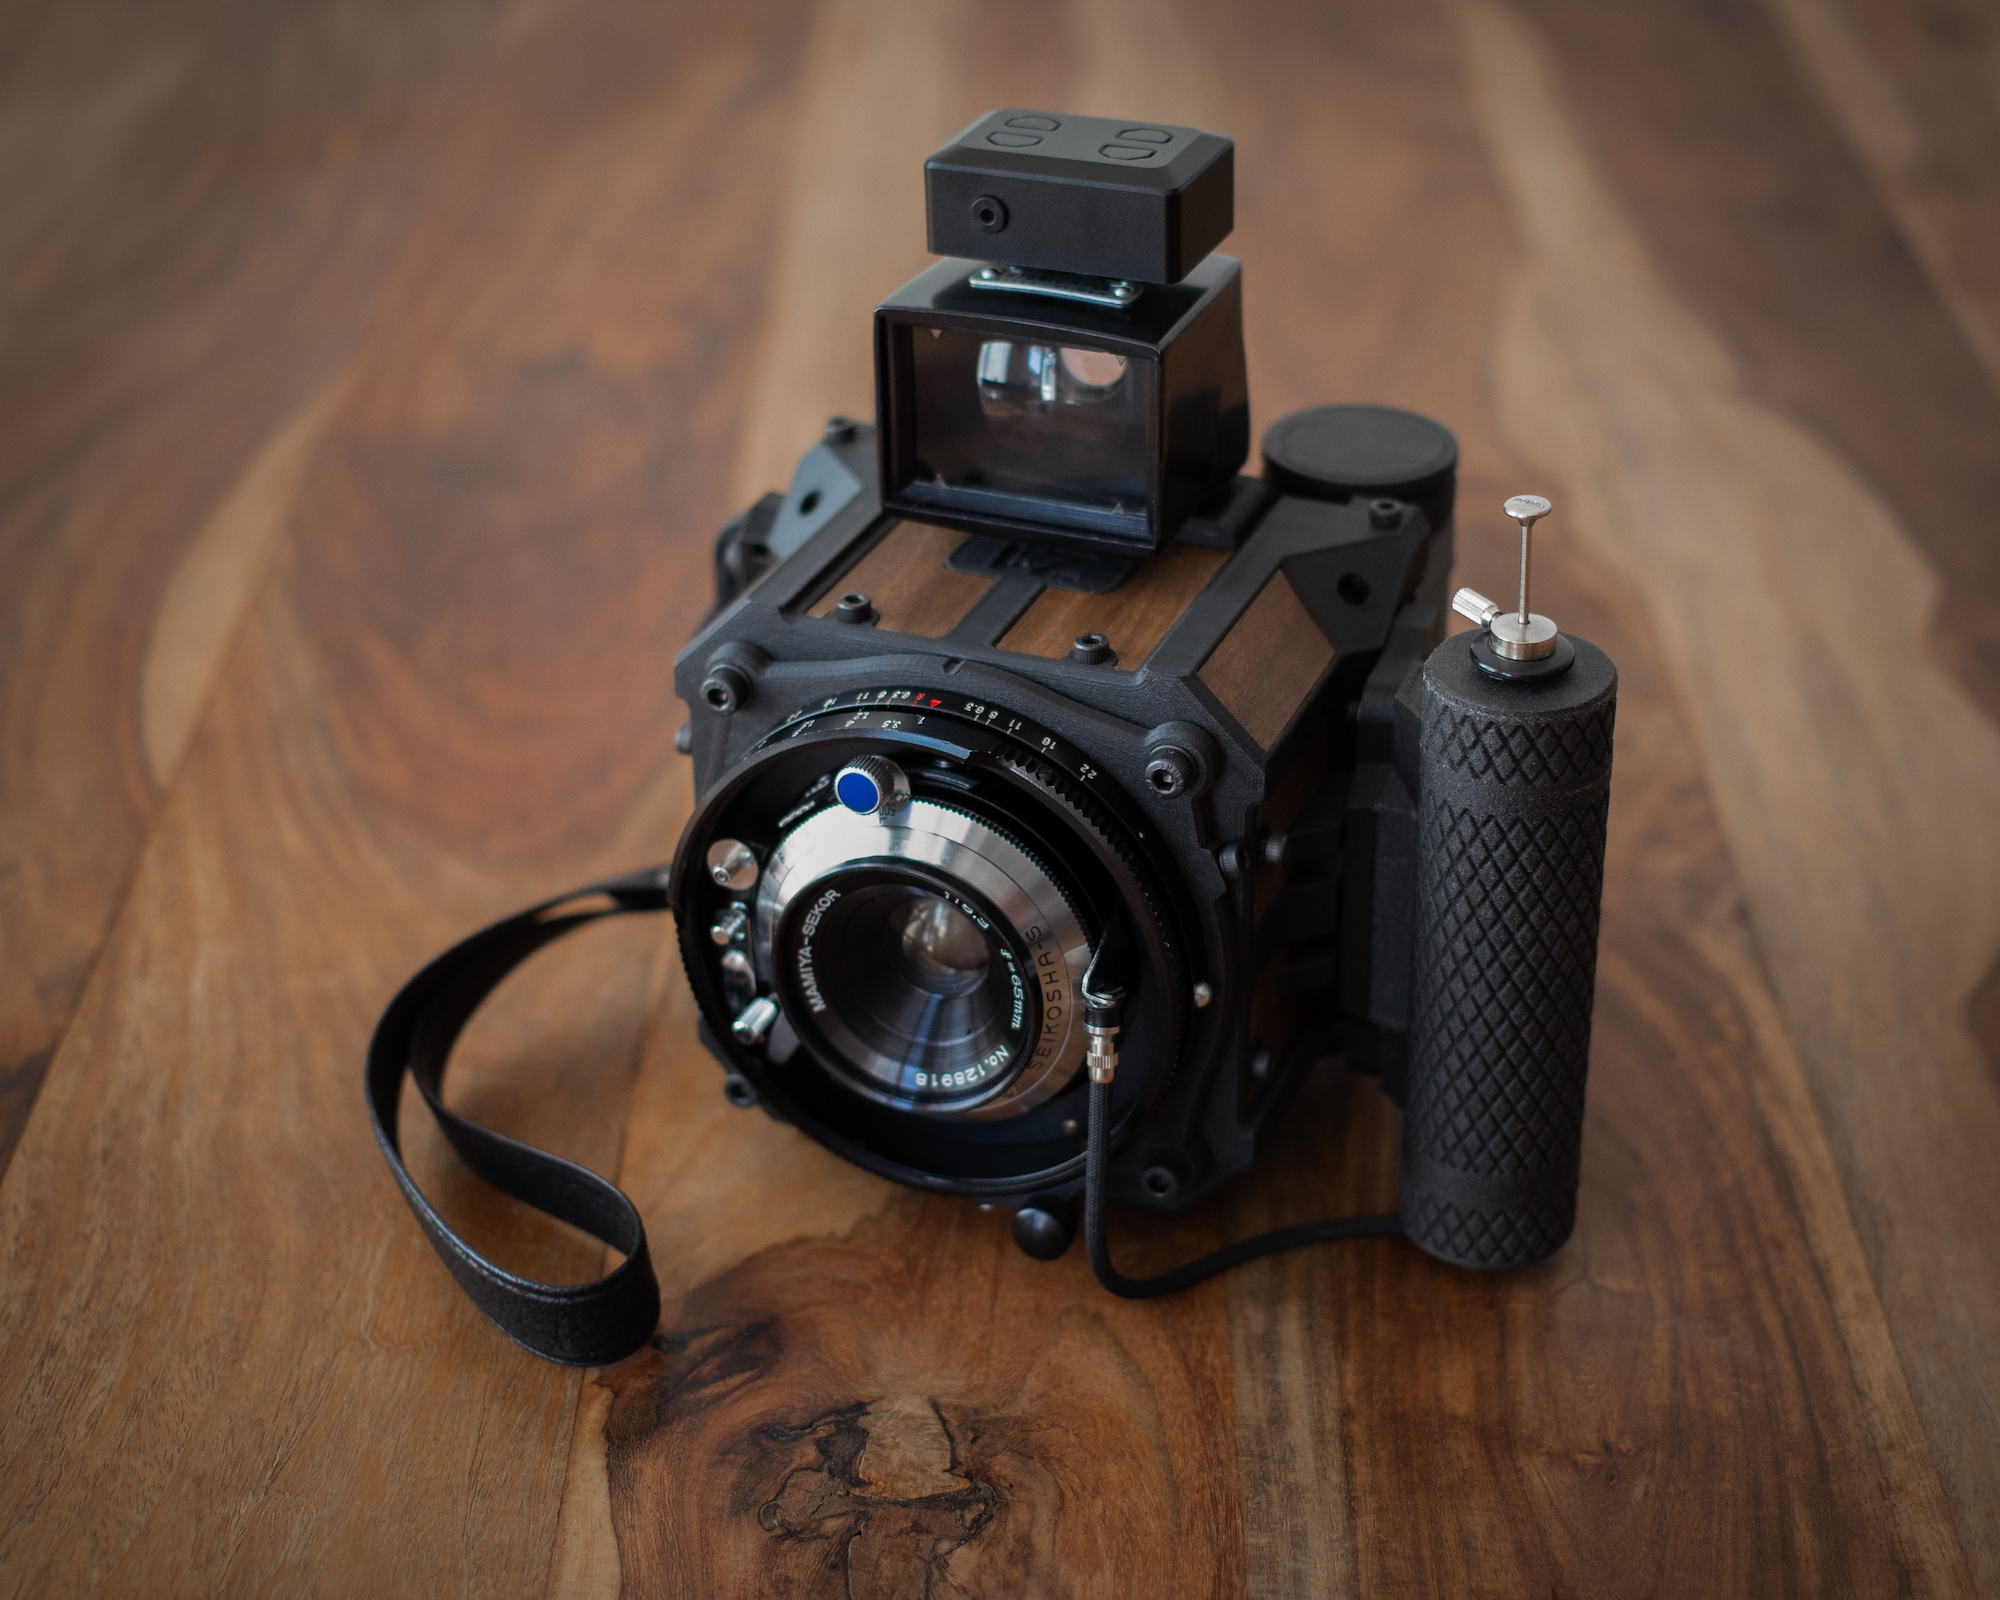 Photographers’ Stories 2. – How can a VR developer’s creativity manifest in a 3D printed camera?